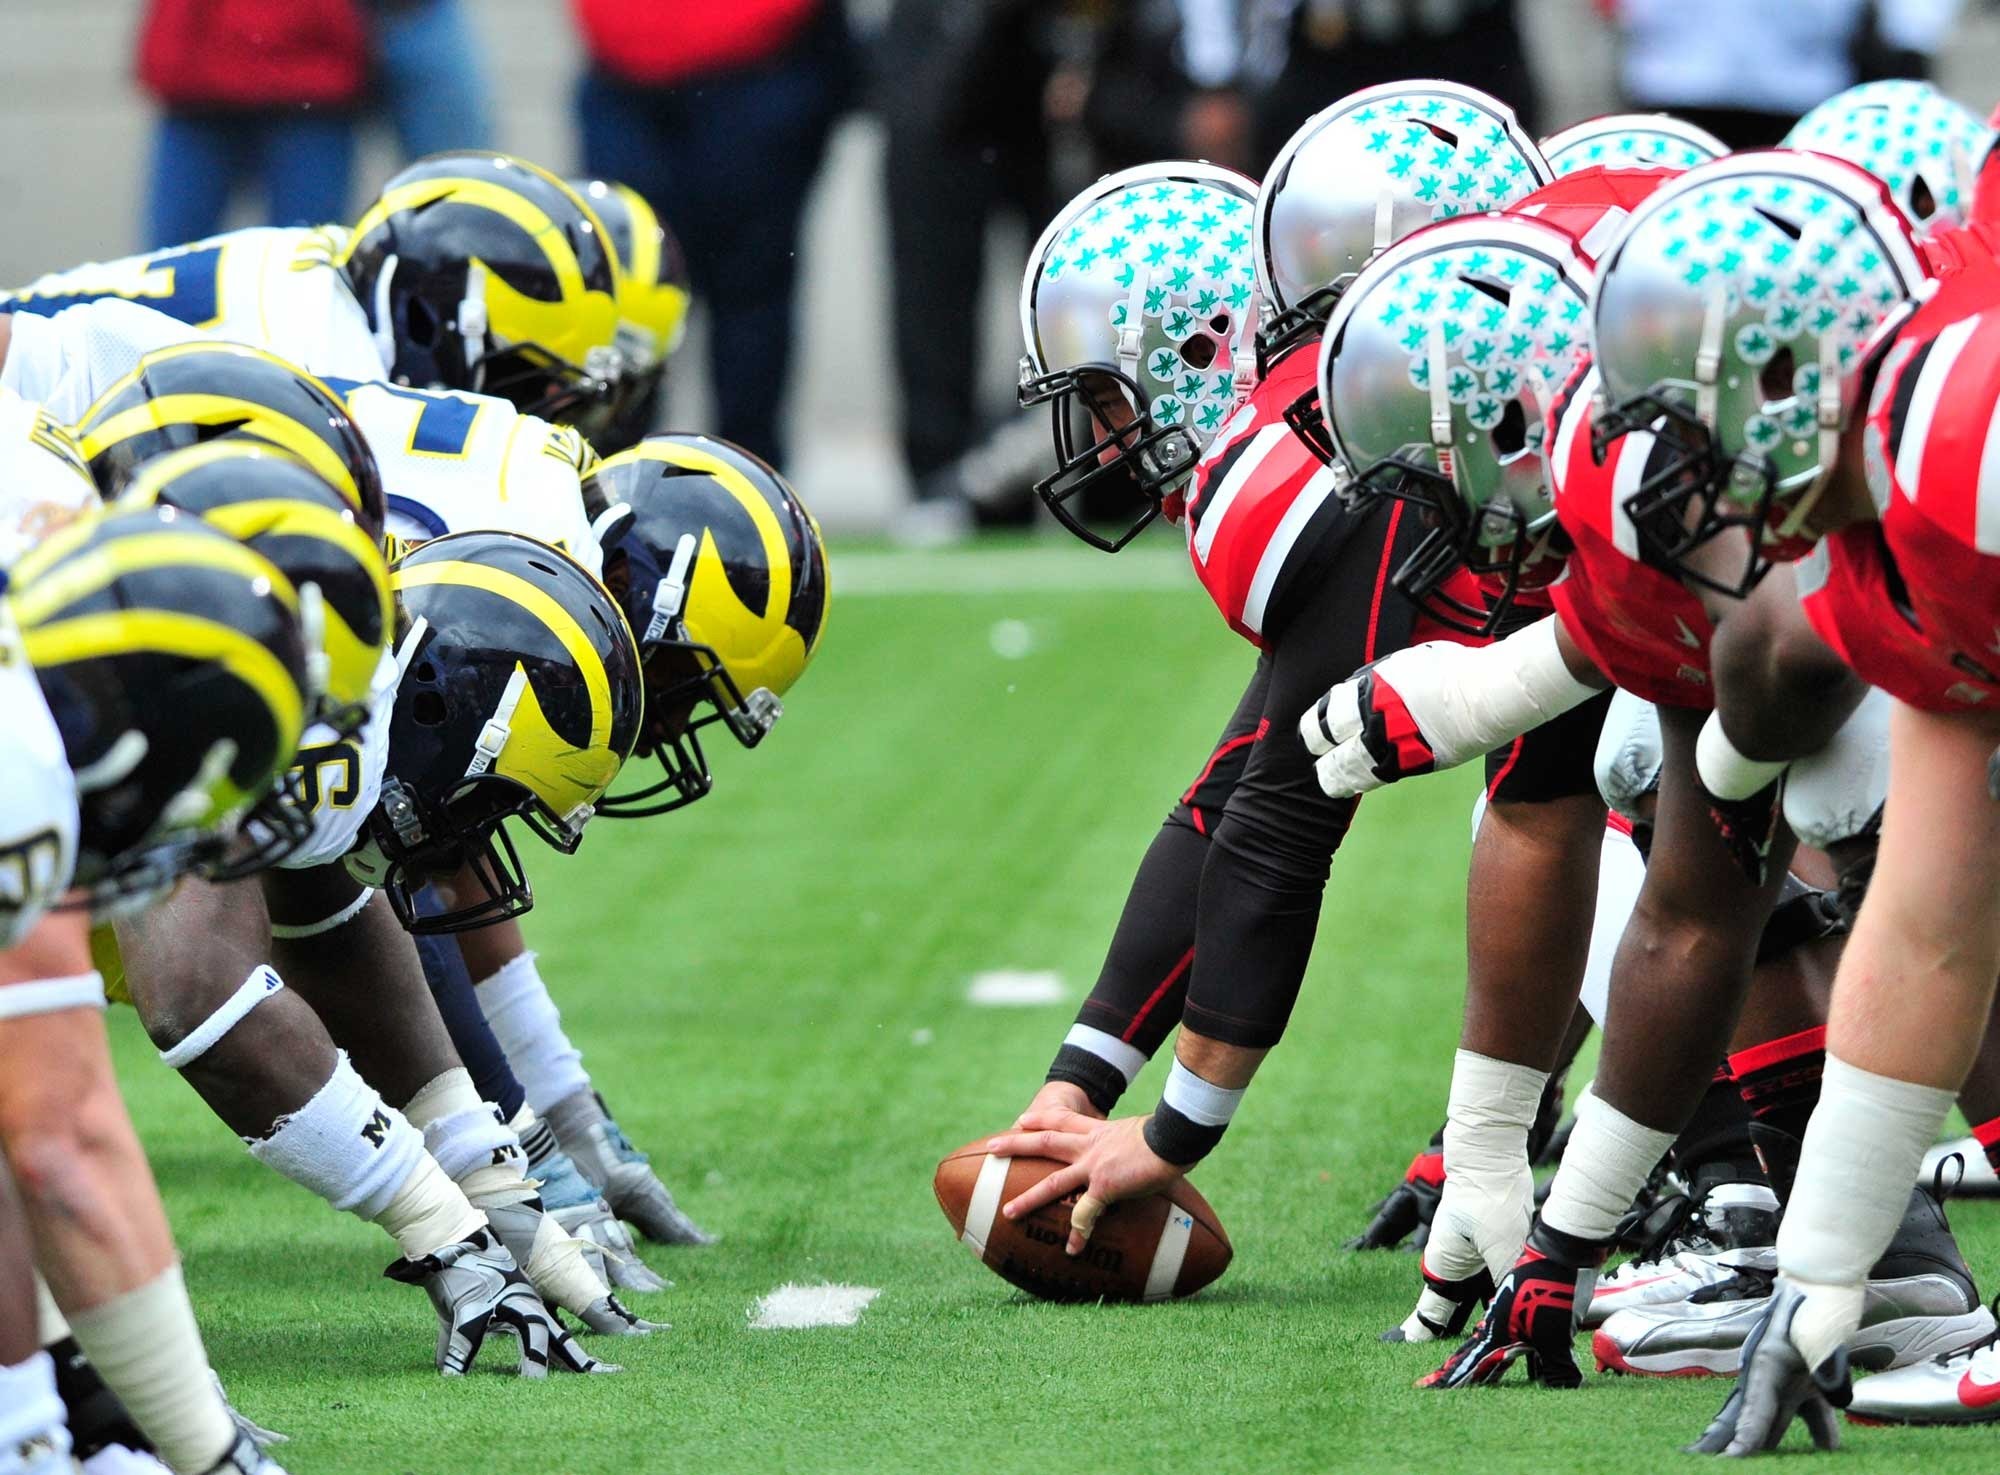 College Football Rivalry Week: Michigan Favored to End Dry Spell Against Ohio State